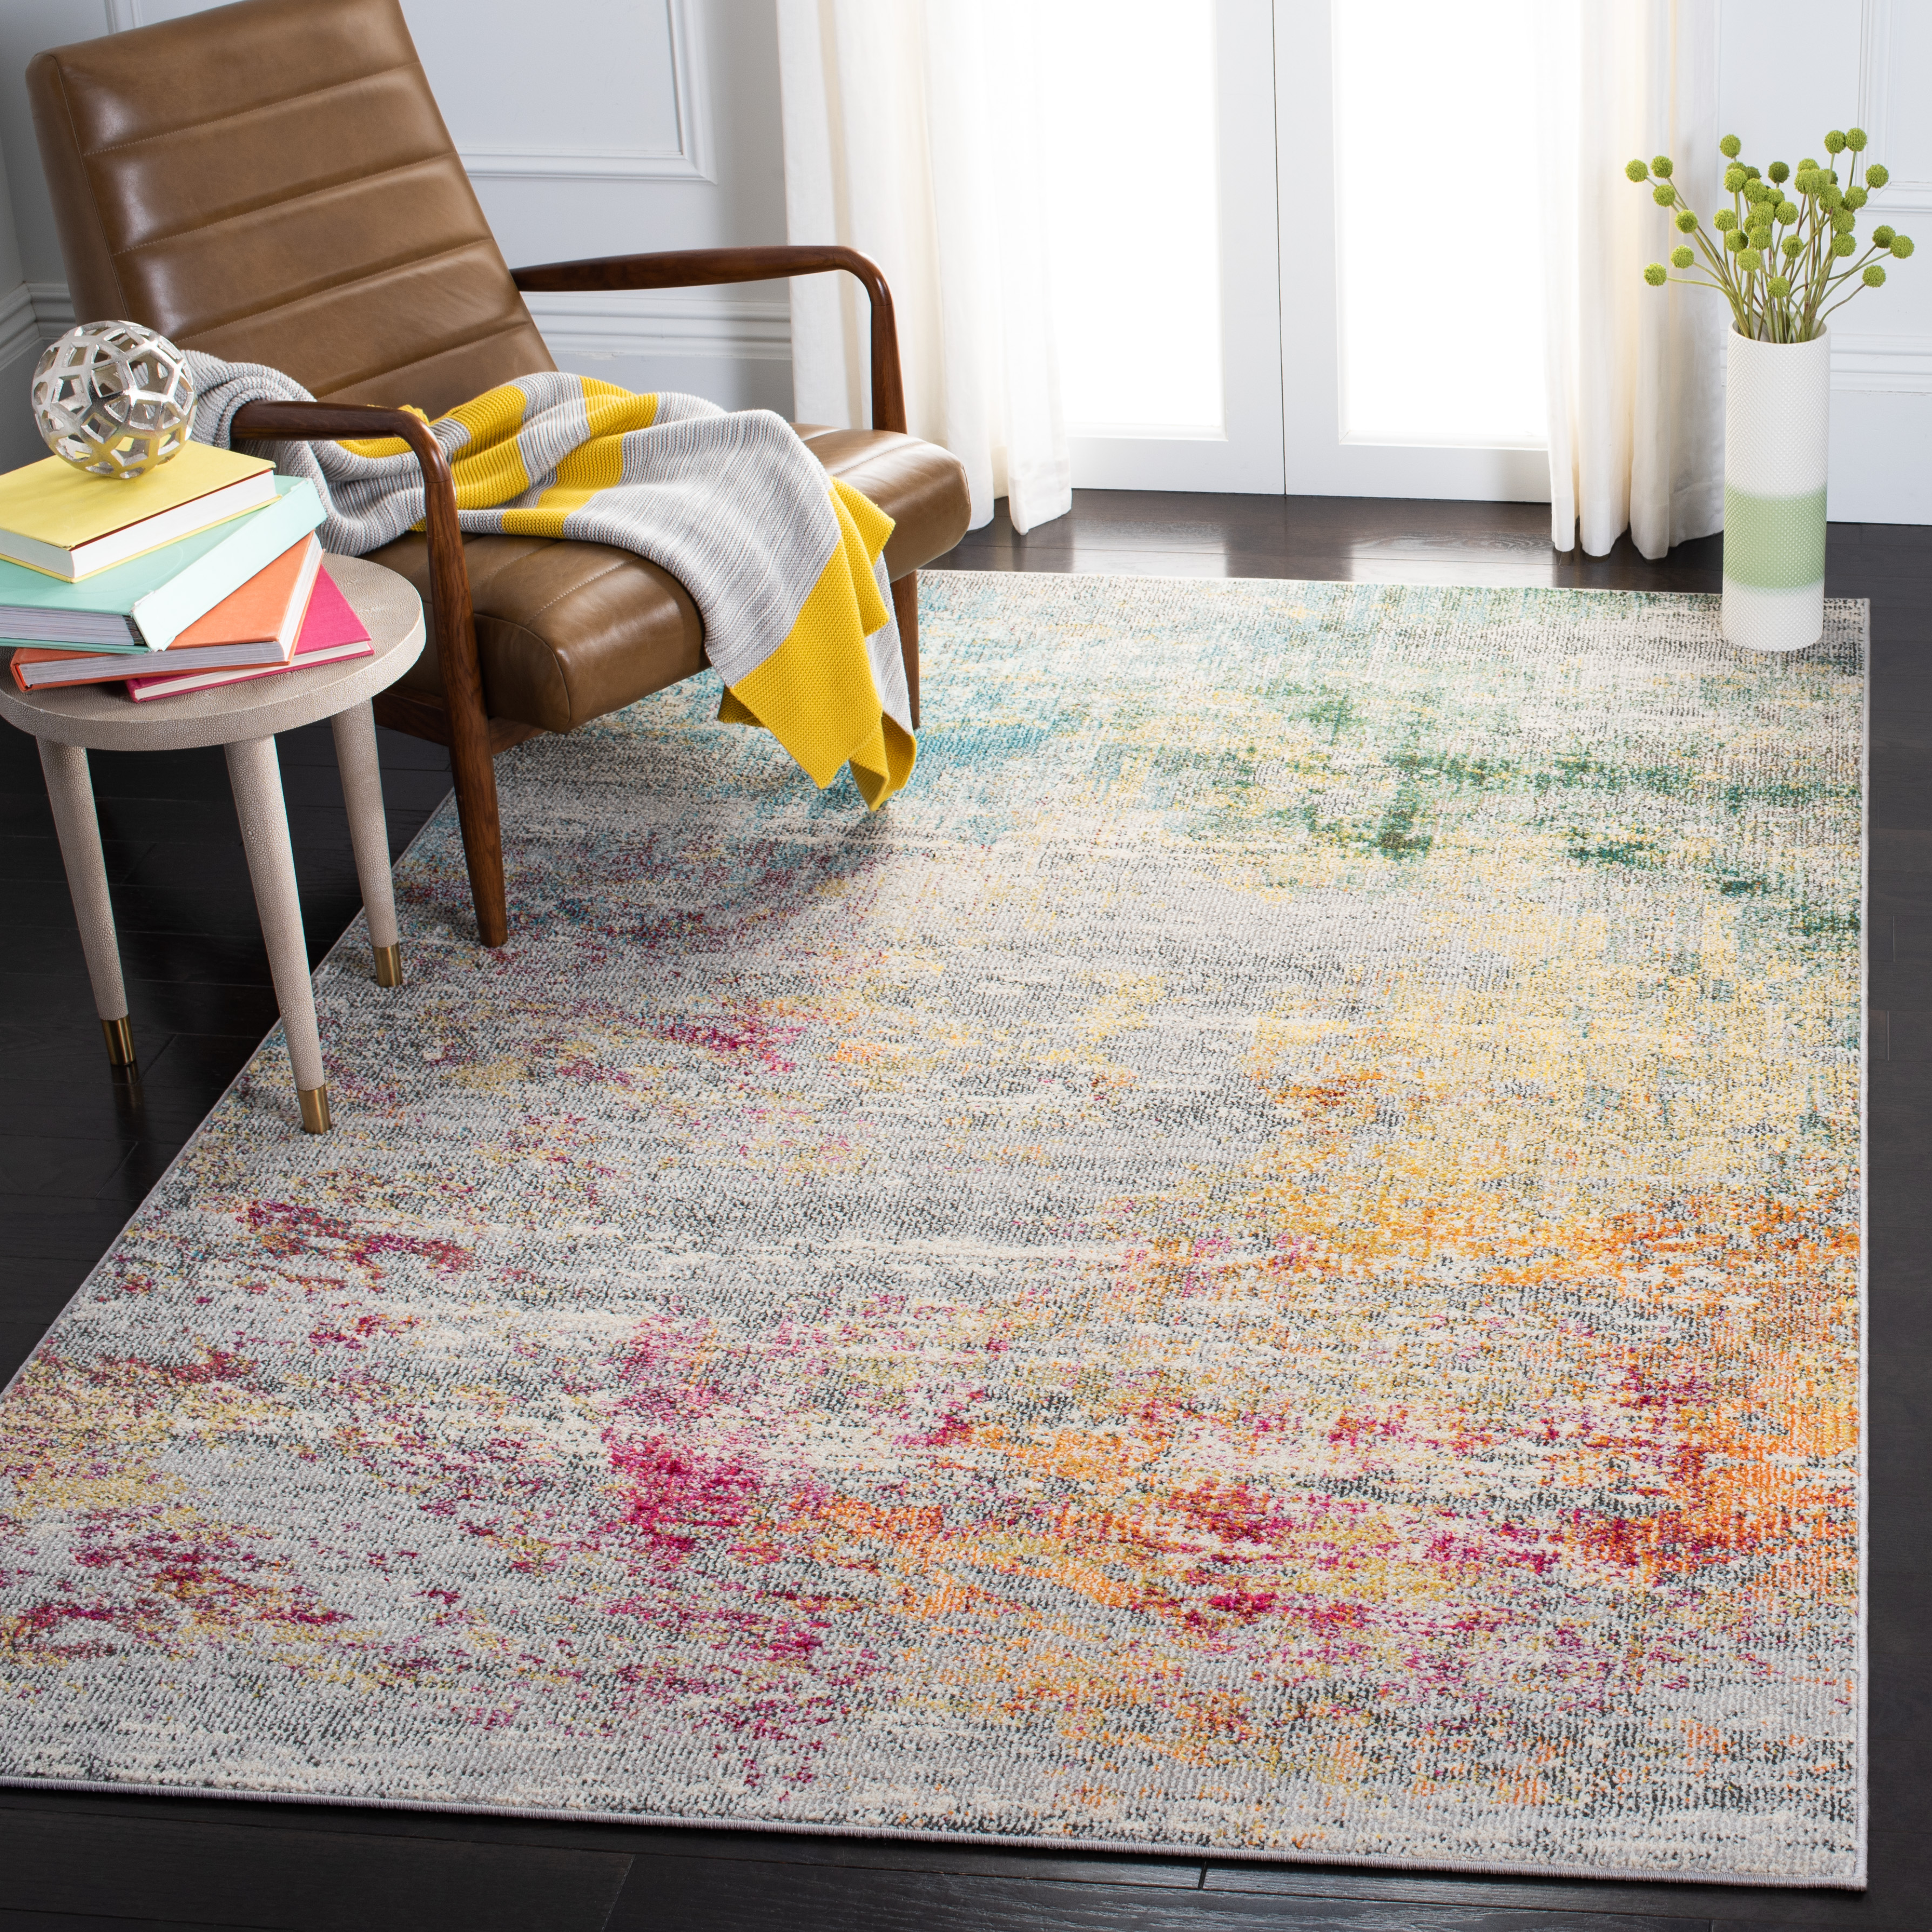 SAFAVIEH Madison Oscar Abstract Distressed Area Rug, Grey/Gold, 5'3" x 7'6" - image 2 of 7